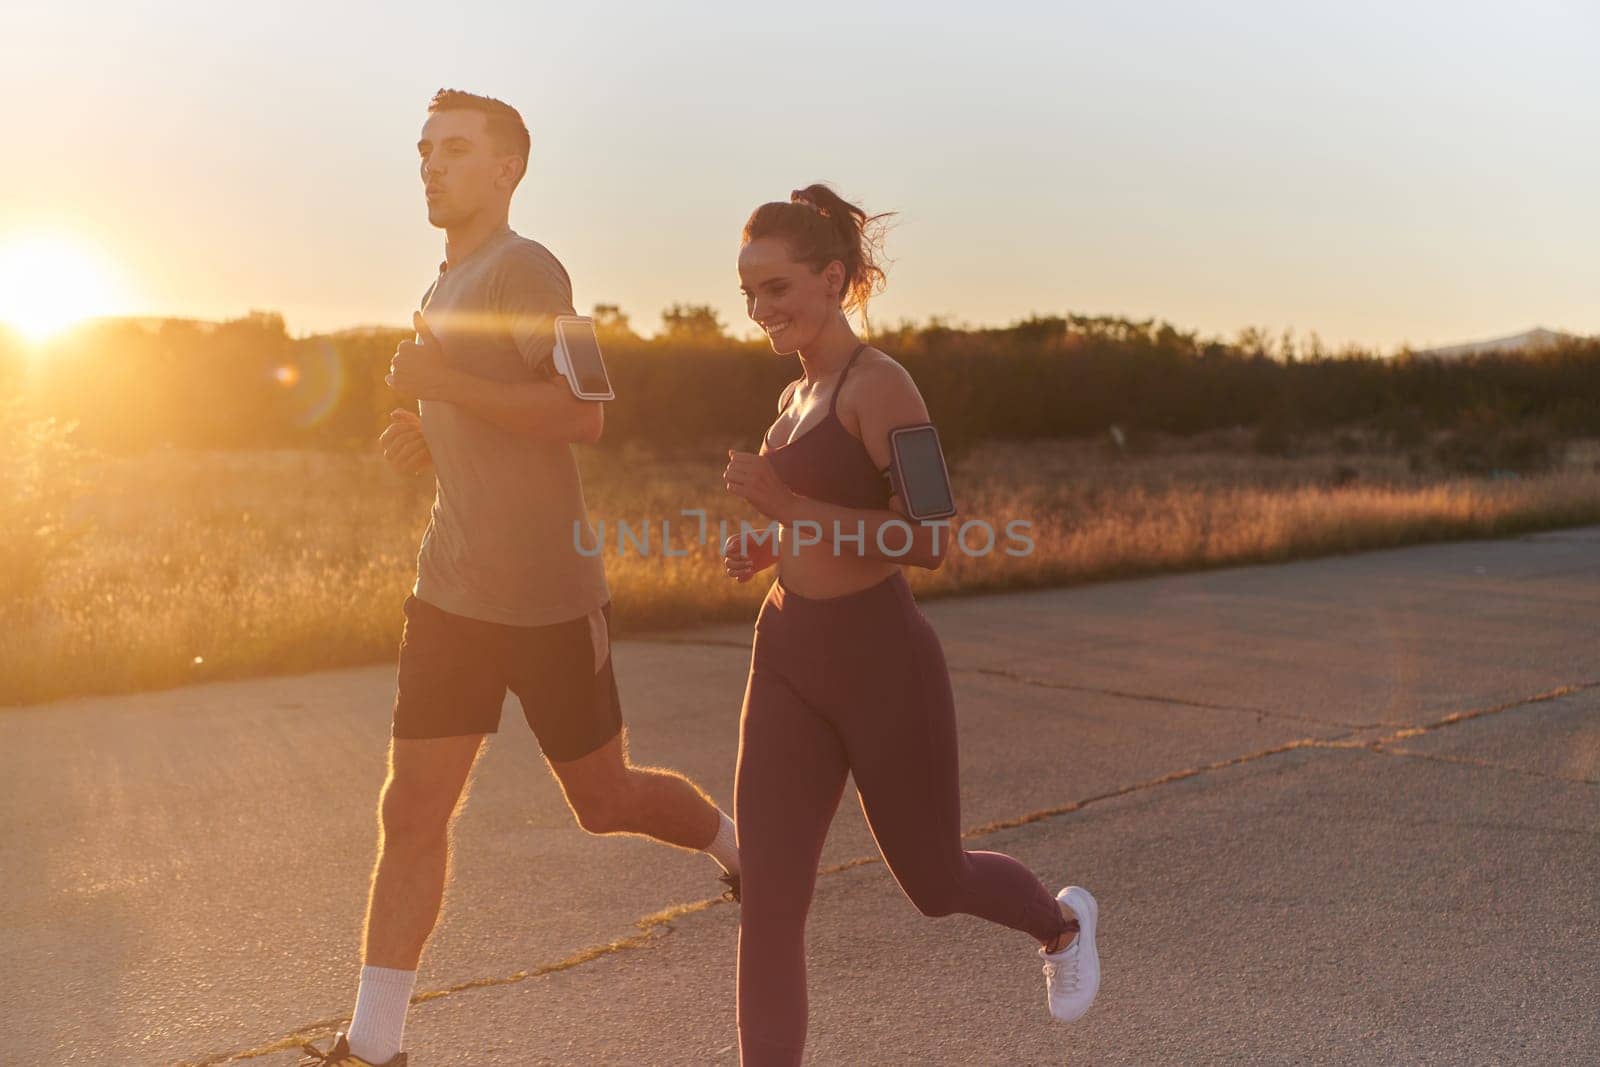 A handsome young couple running together during the early morning hours, with the mesmerizing sunrise casting a warm glow, symbolizing their shared love and vitality.